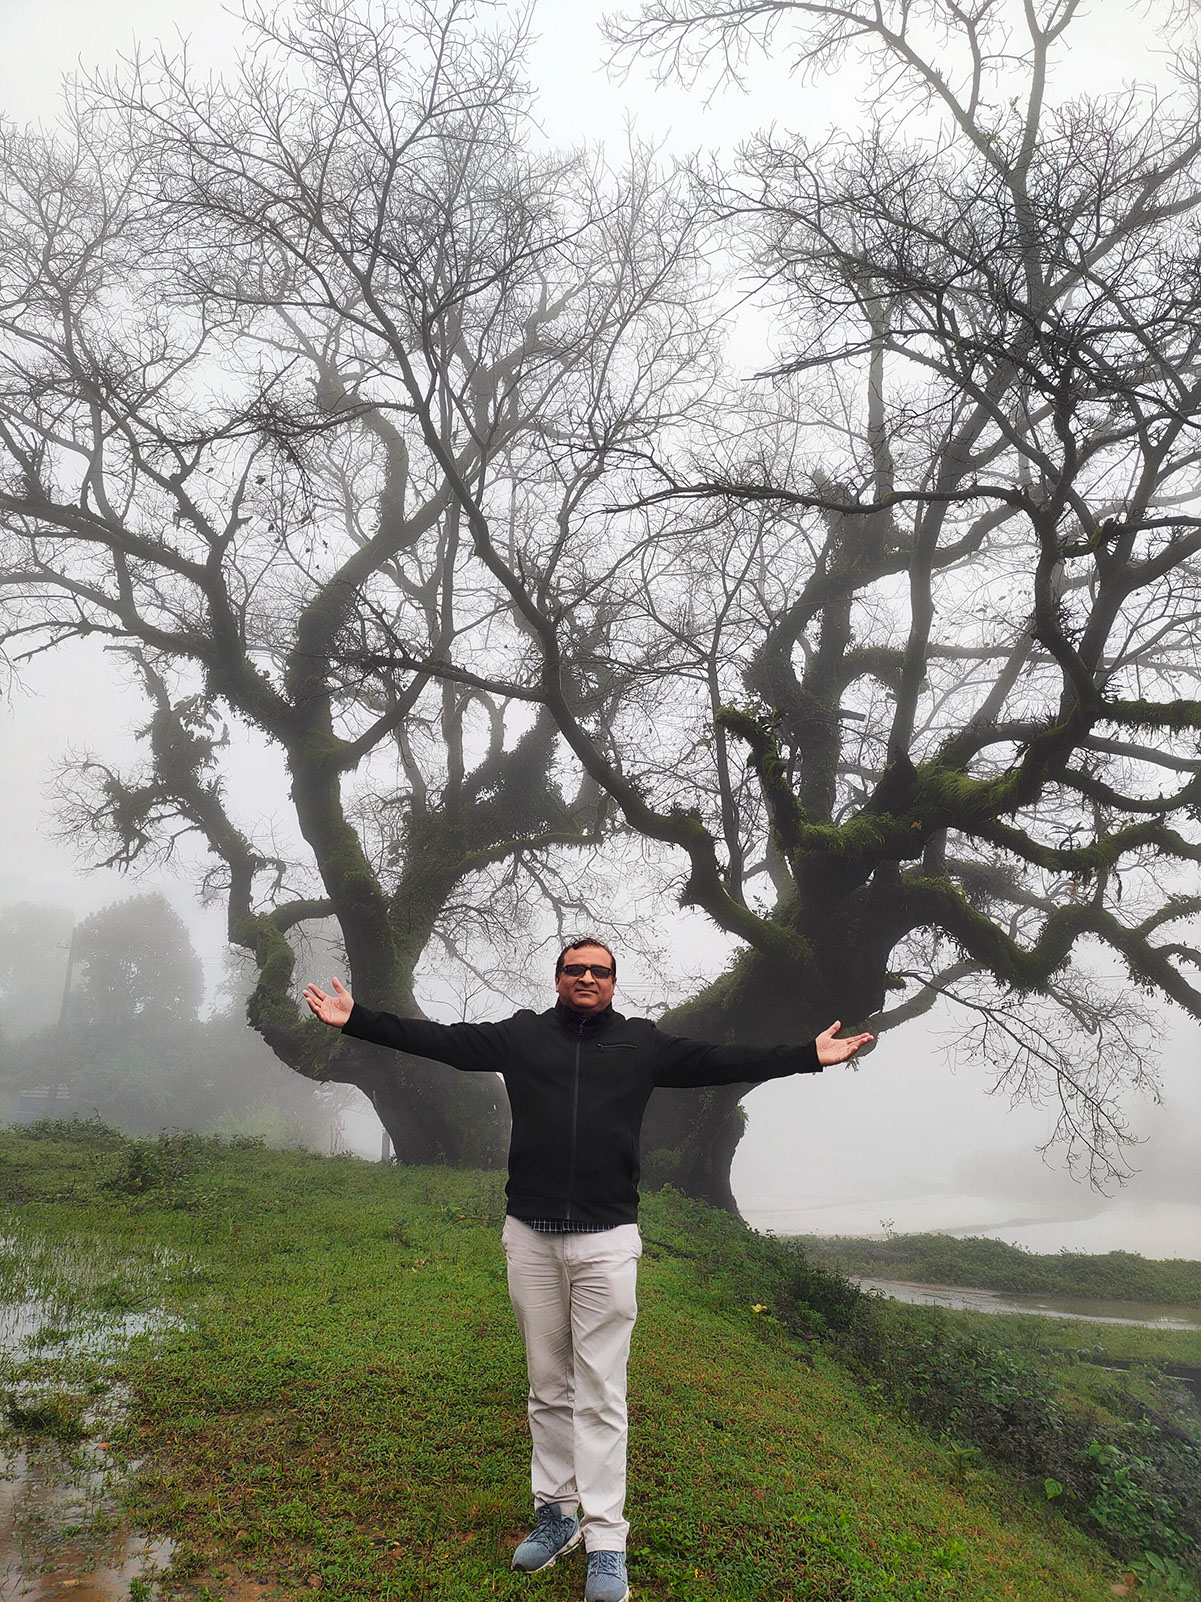 Rahuldev Rajguru is trying to emerge with the surroundings on a misty morning in Coorg.